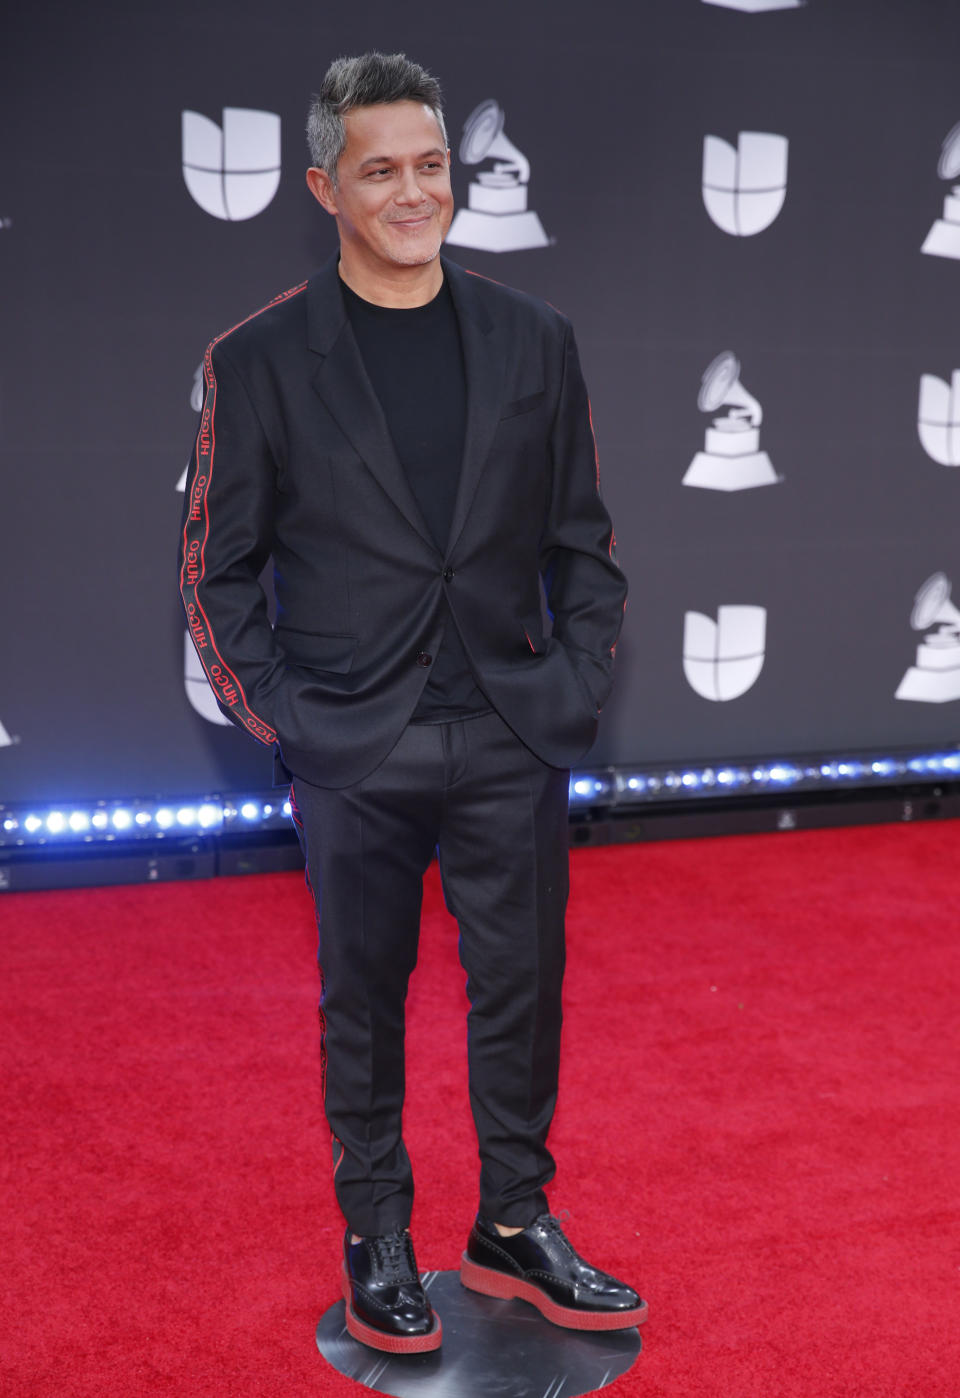 Alejandro Sanz arrives at the 20th Latin Grammy Awards on Thursday, Nov. 14, 2019, at the MGM Grand Garden Arena in Las Vegas. (Photo by Eric Jamison/Invision/AP)